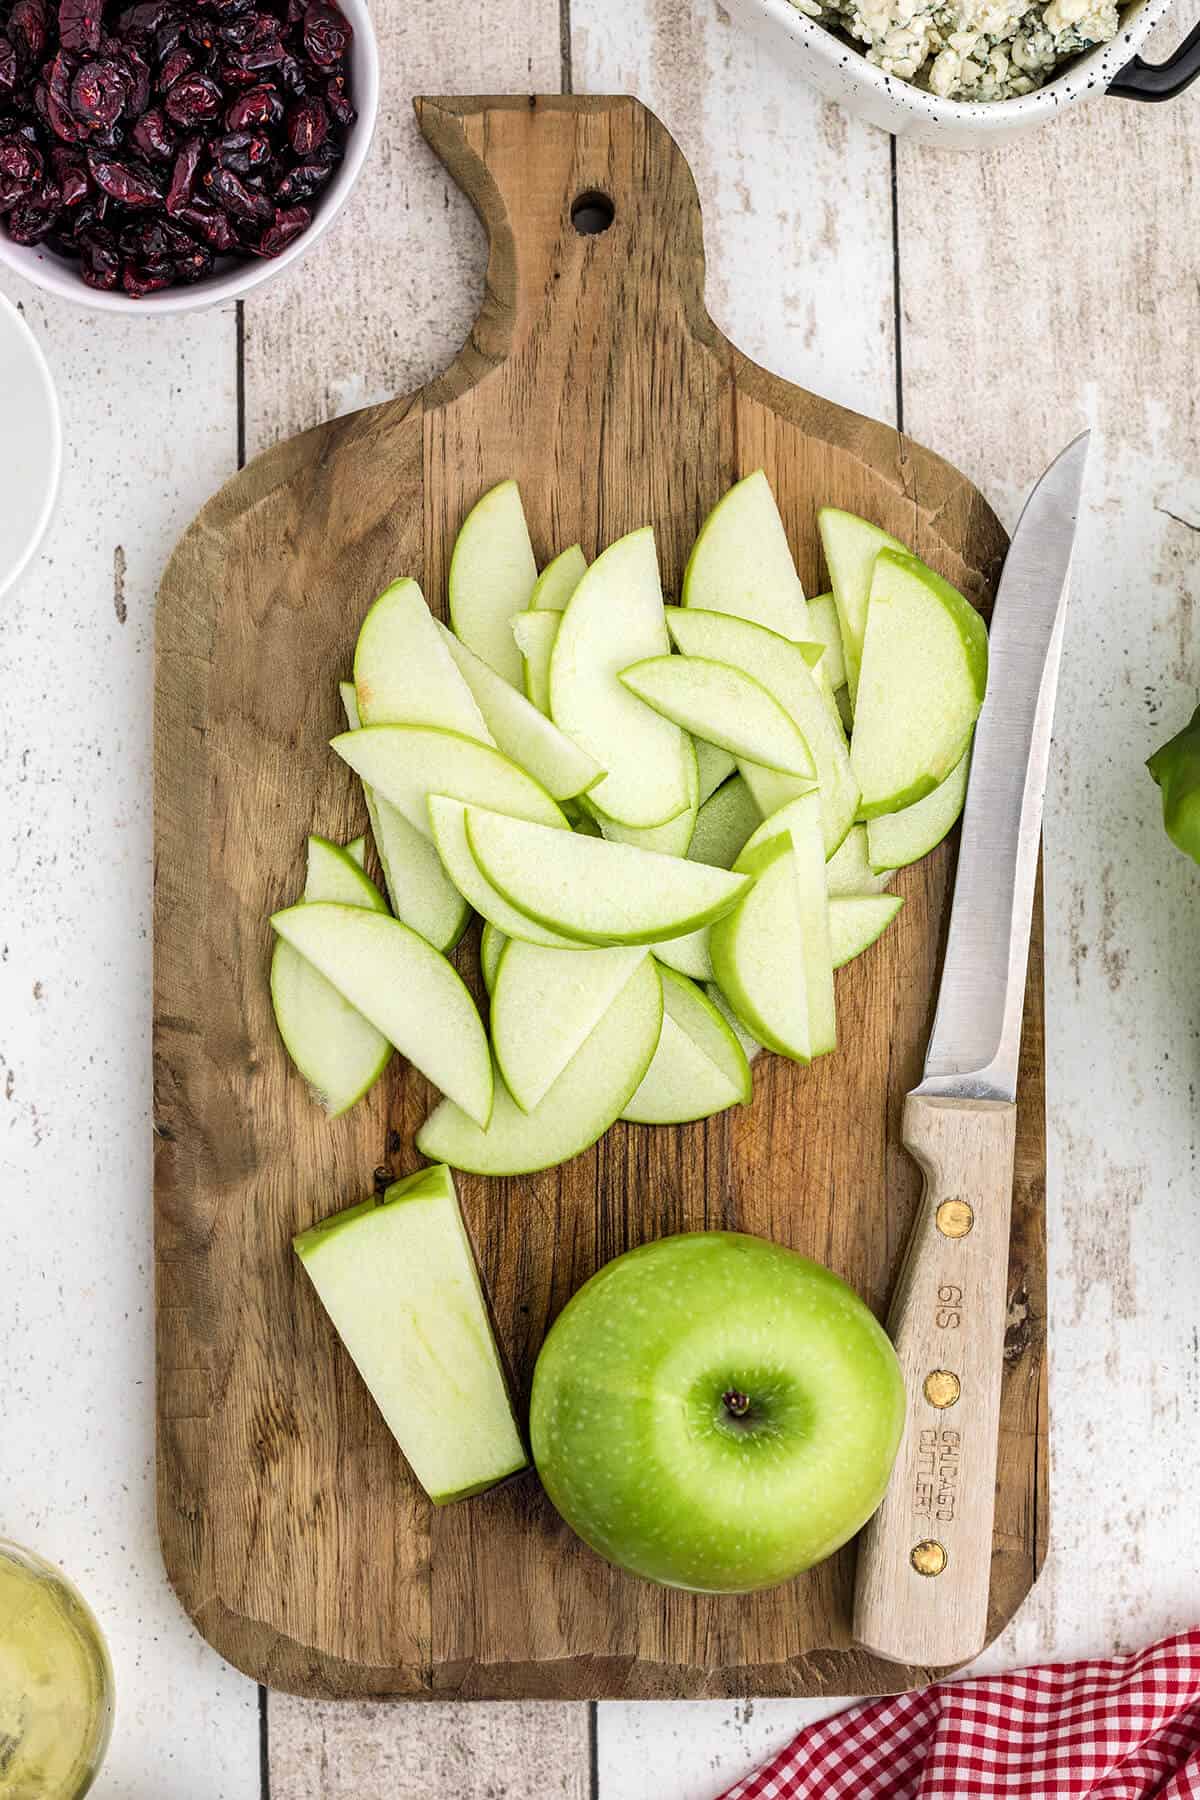 Apple slices and a knife on a cutting board.